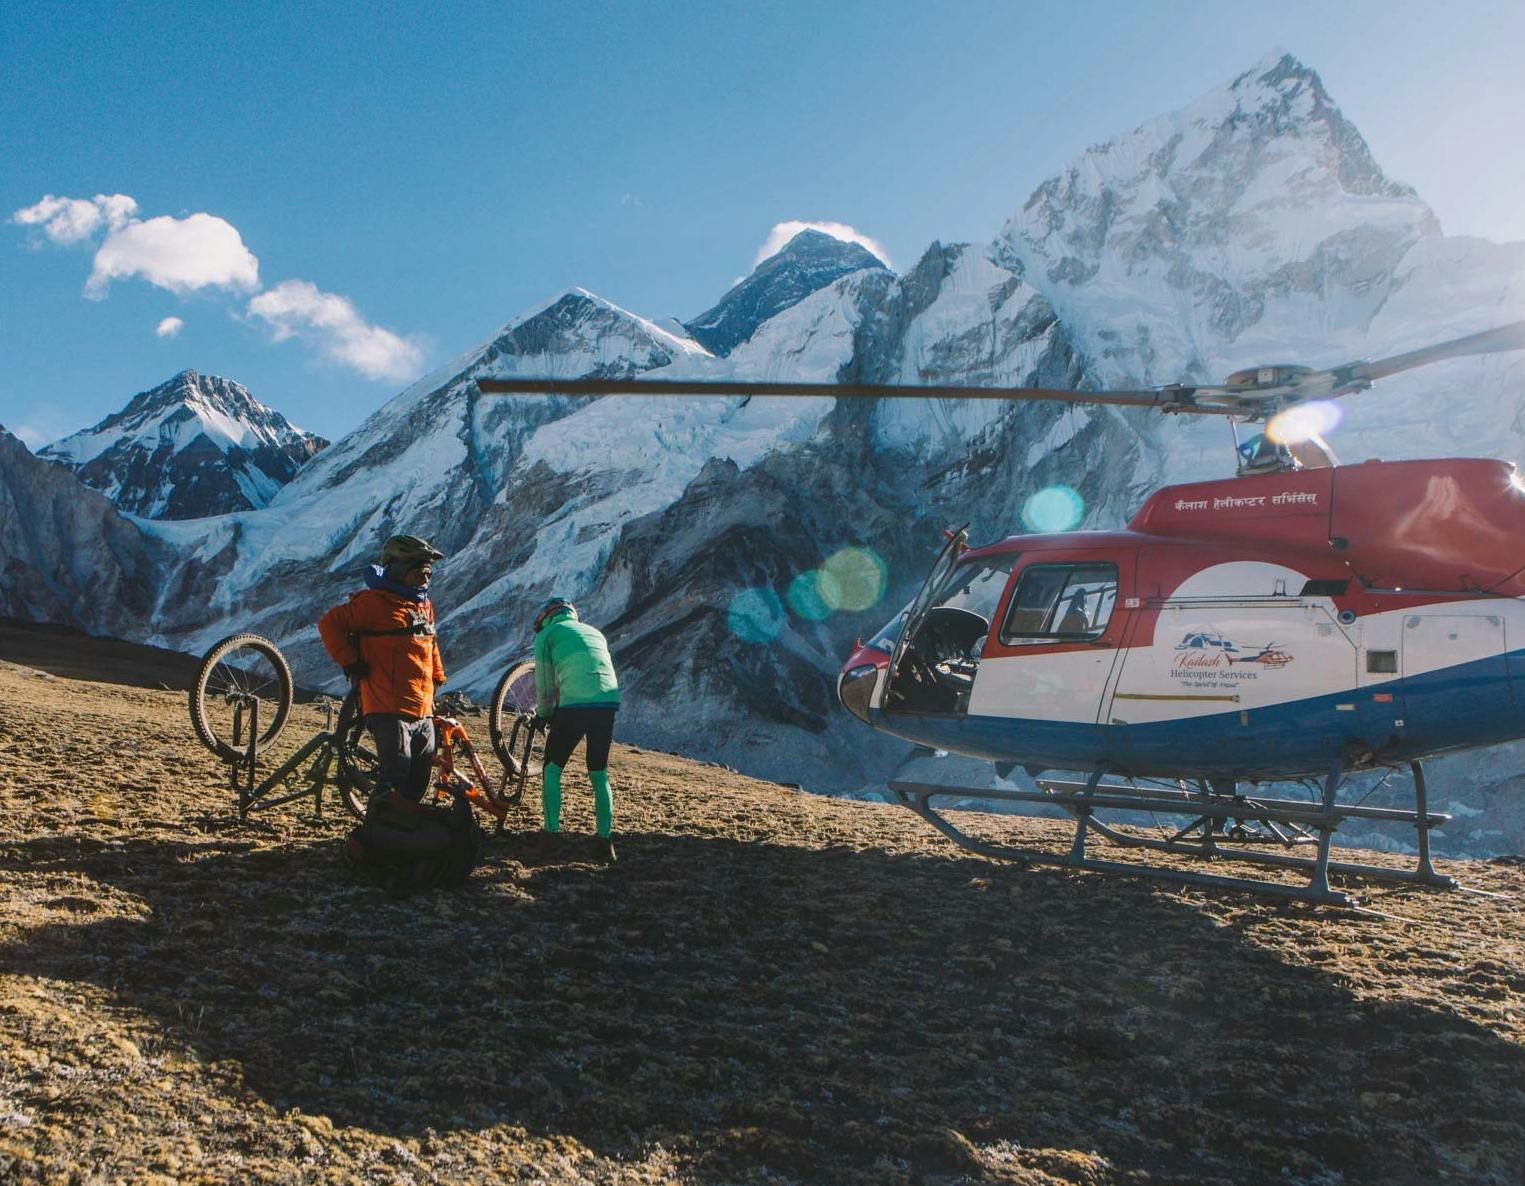 Helicopter Tours in Nepal: Soaring Above the Himalayas